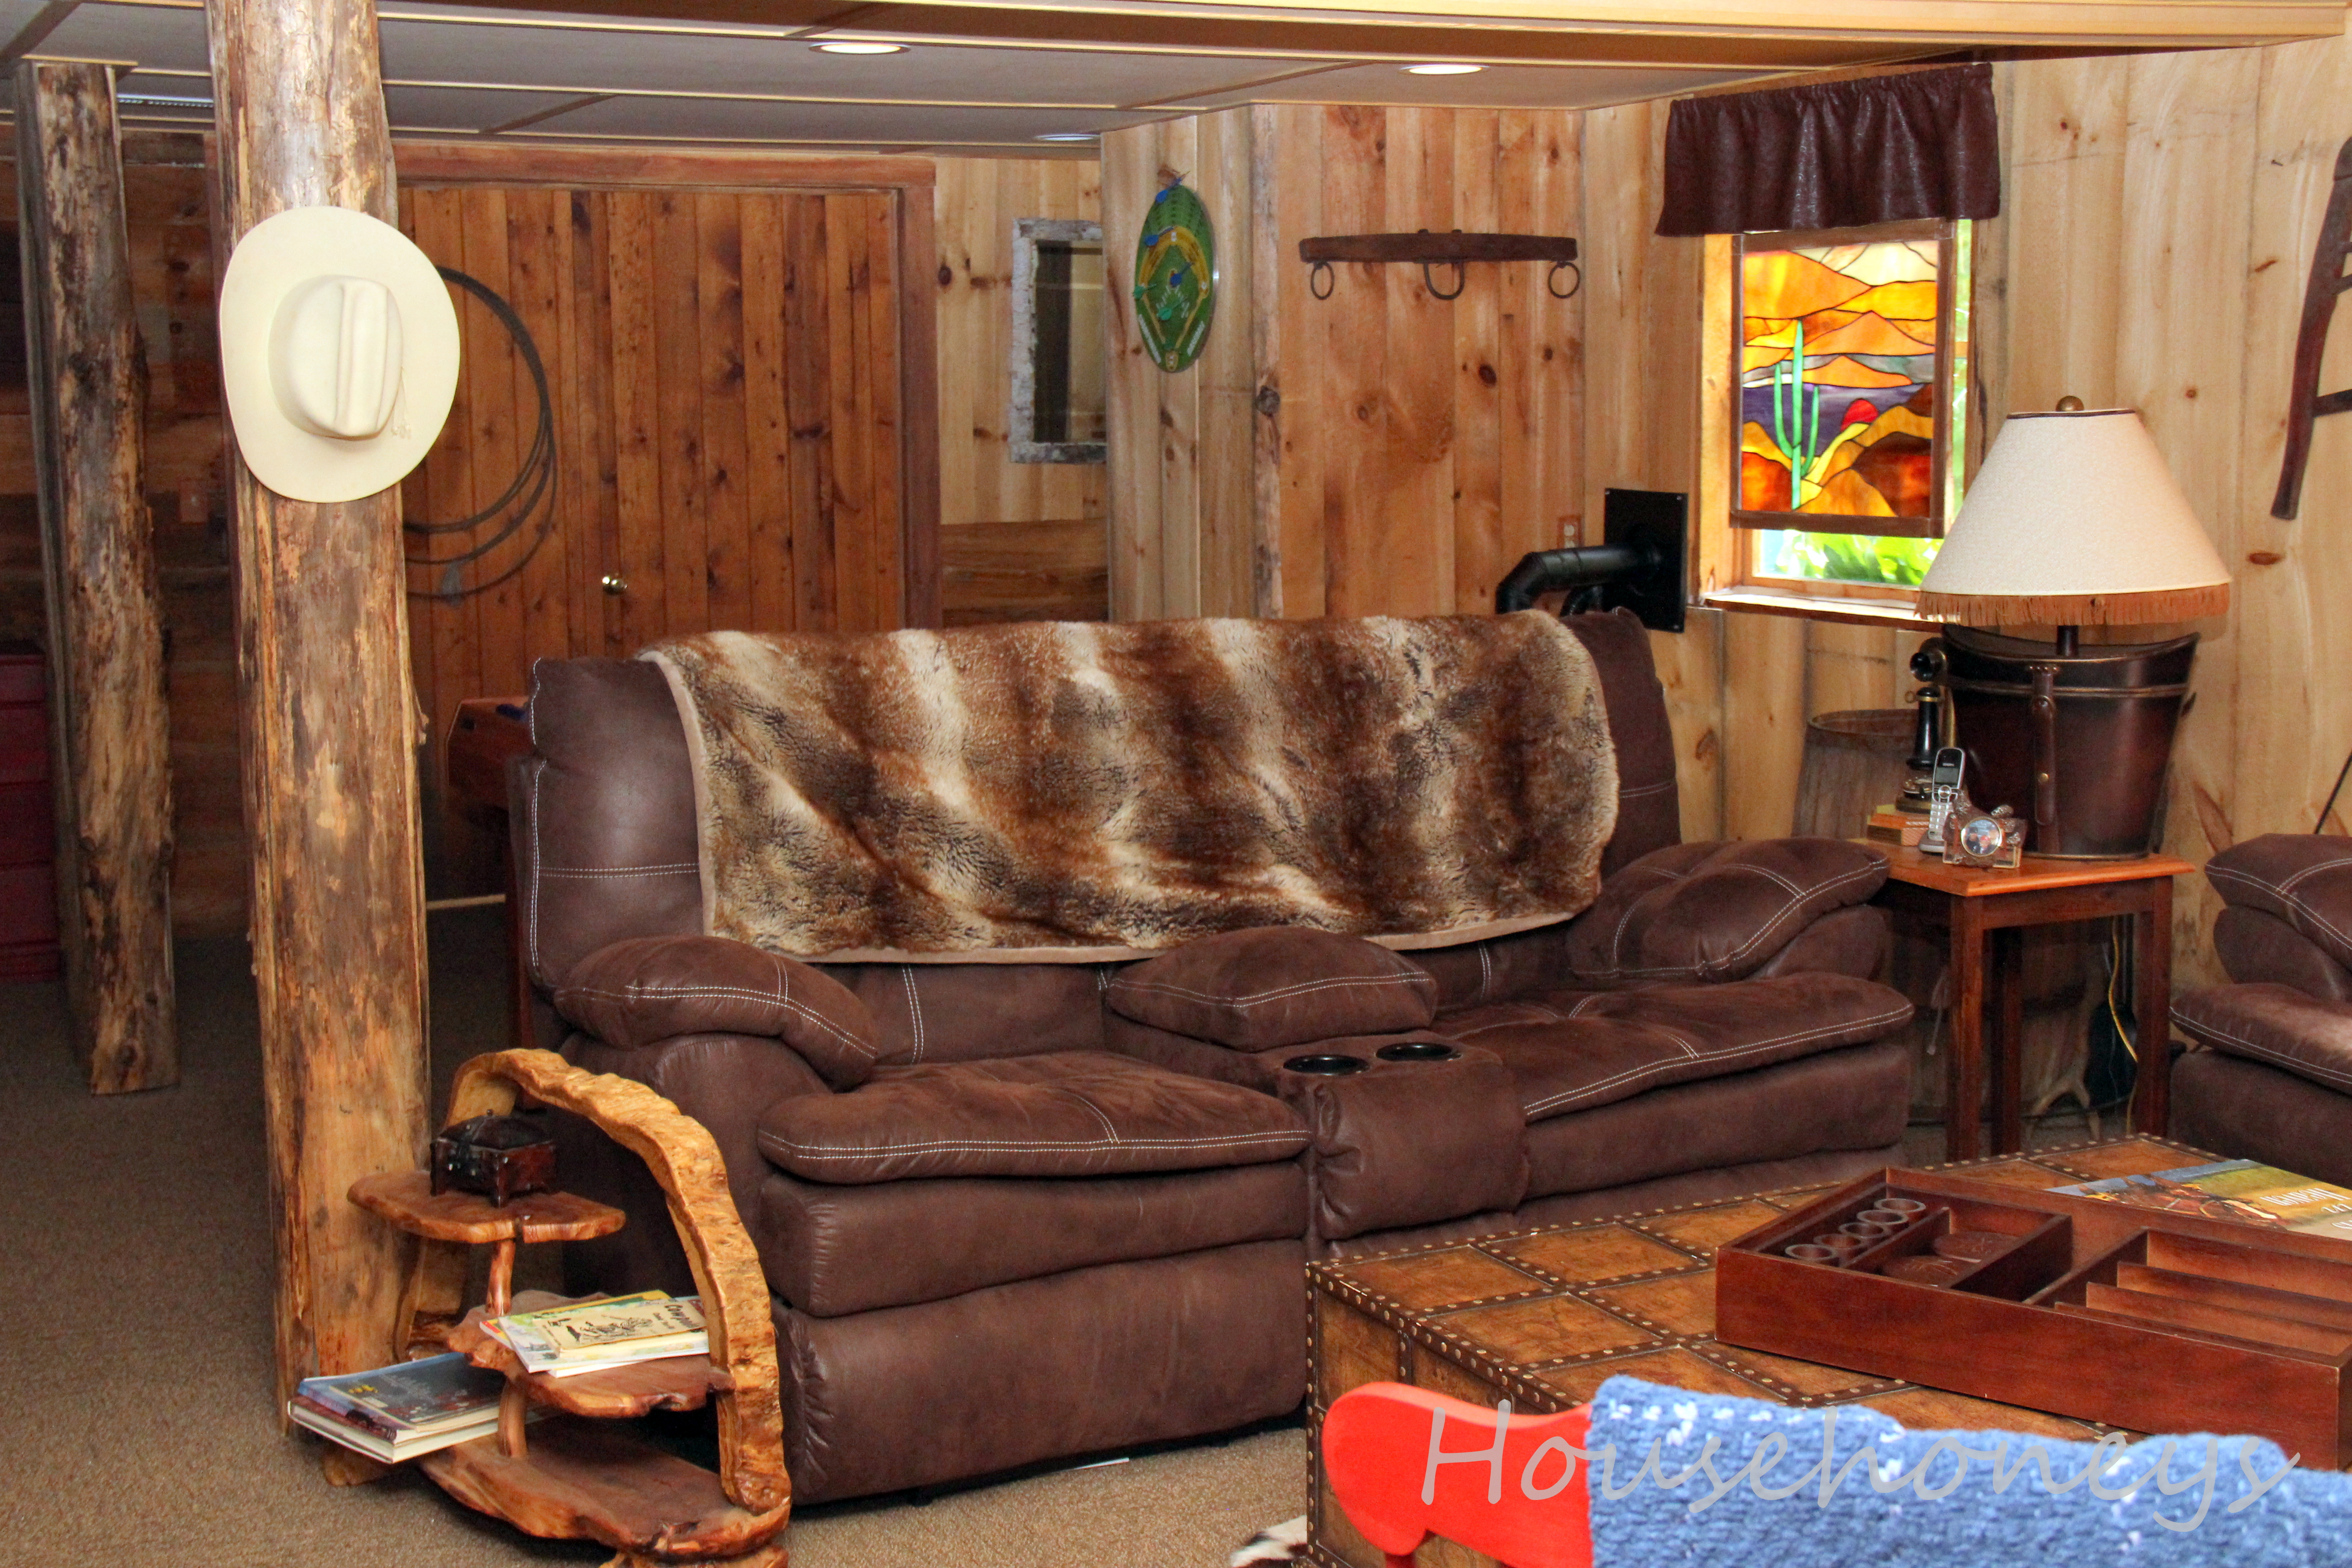 Futuristic Western Themed Room Ideas in Living room